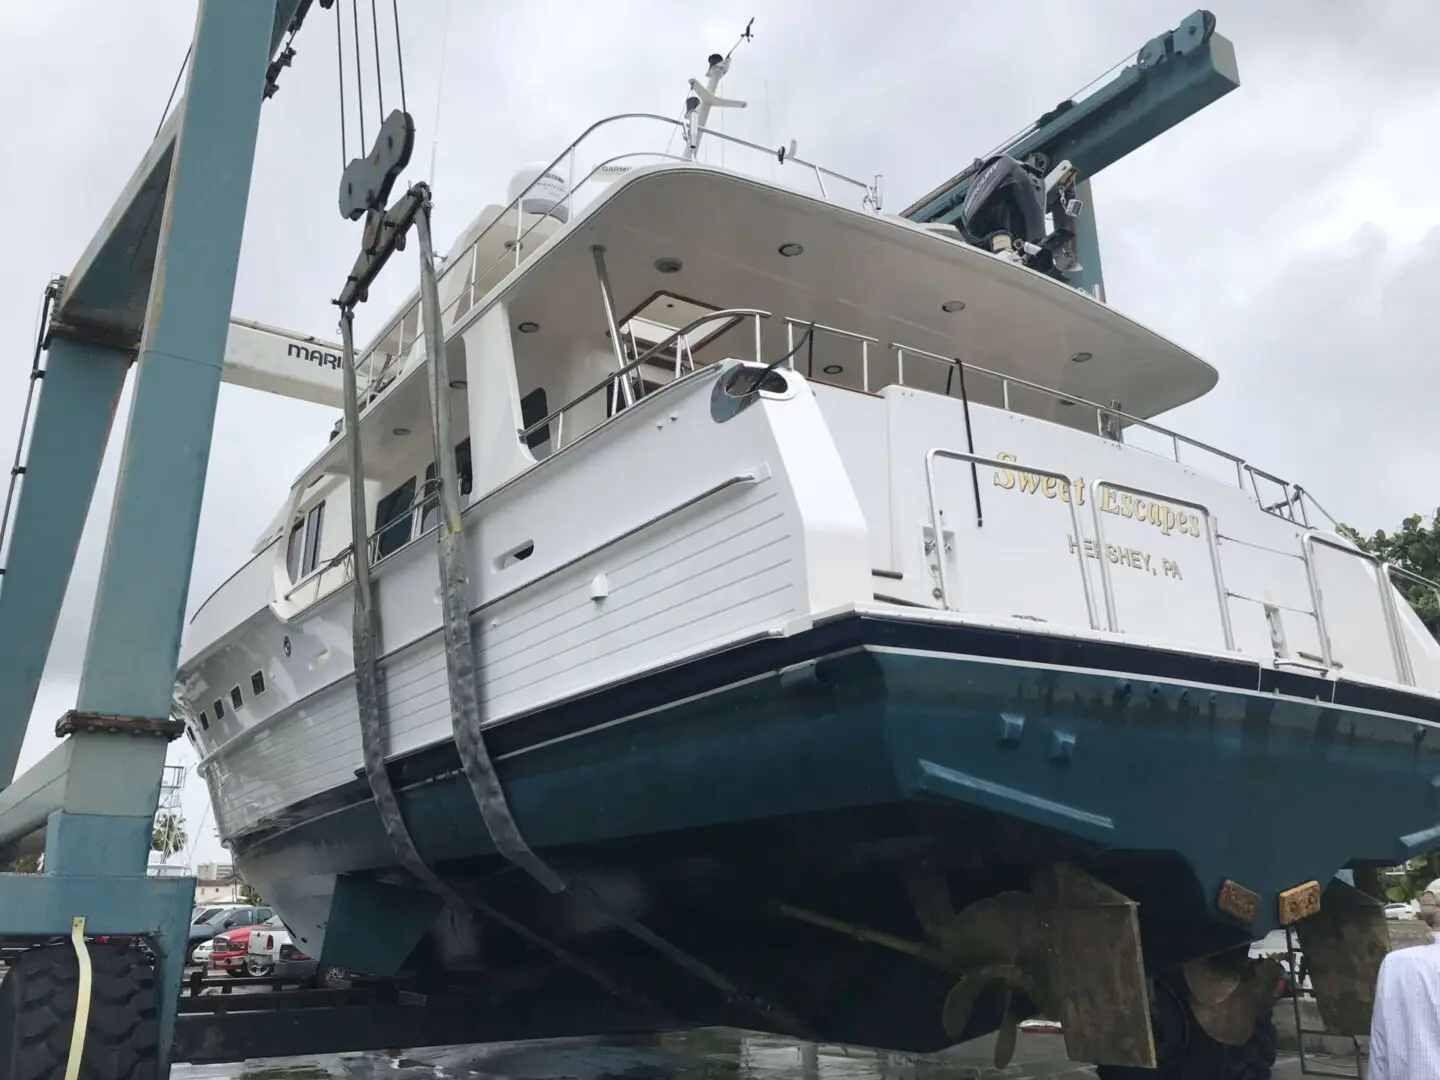 A Sweet Escapes yacht lifted up